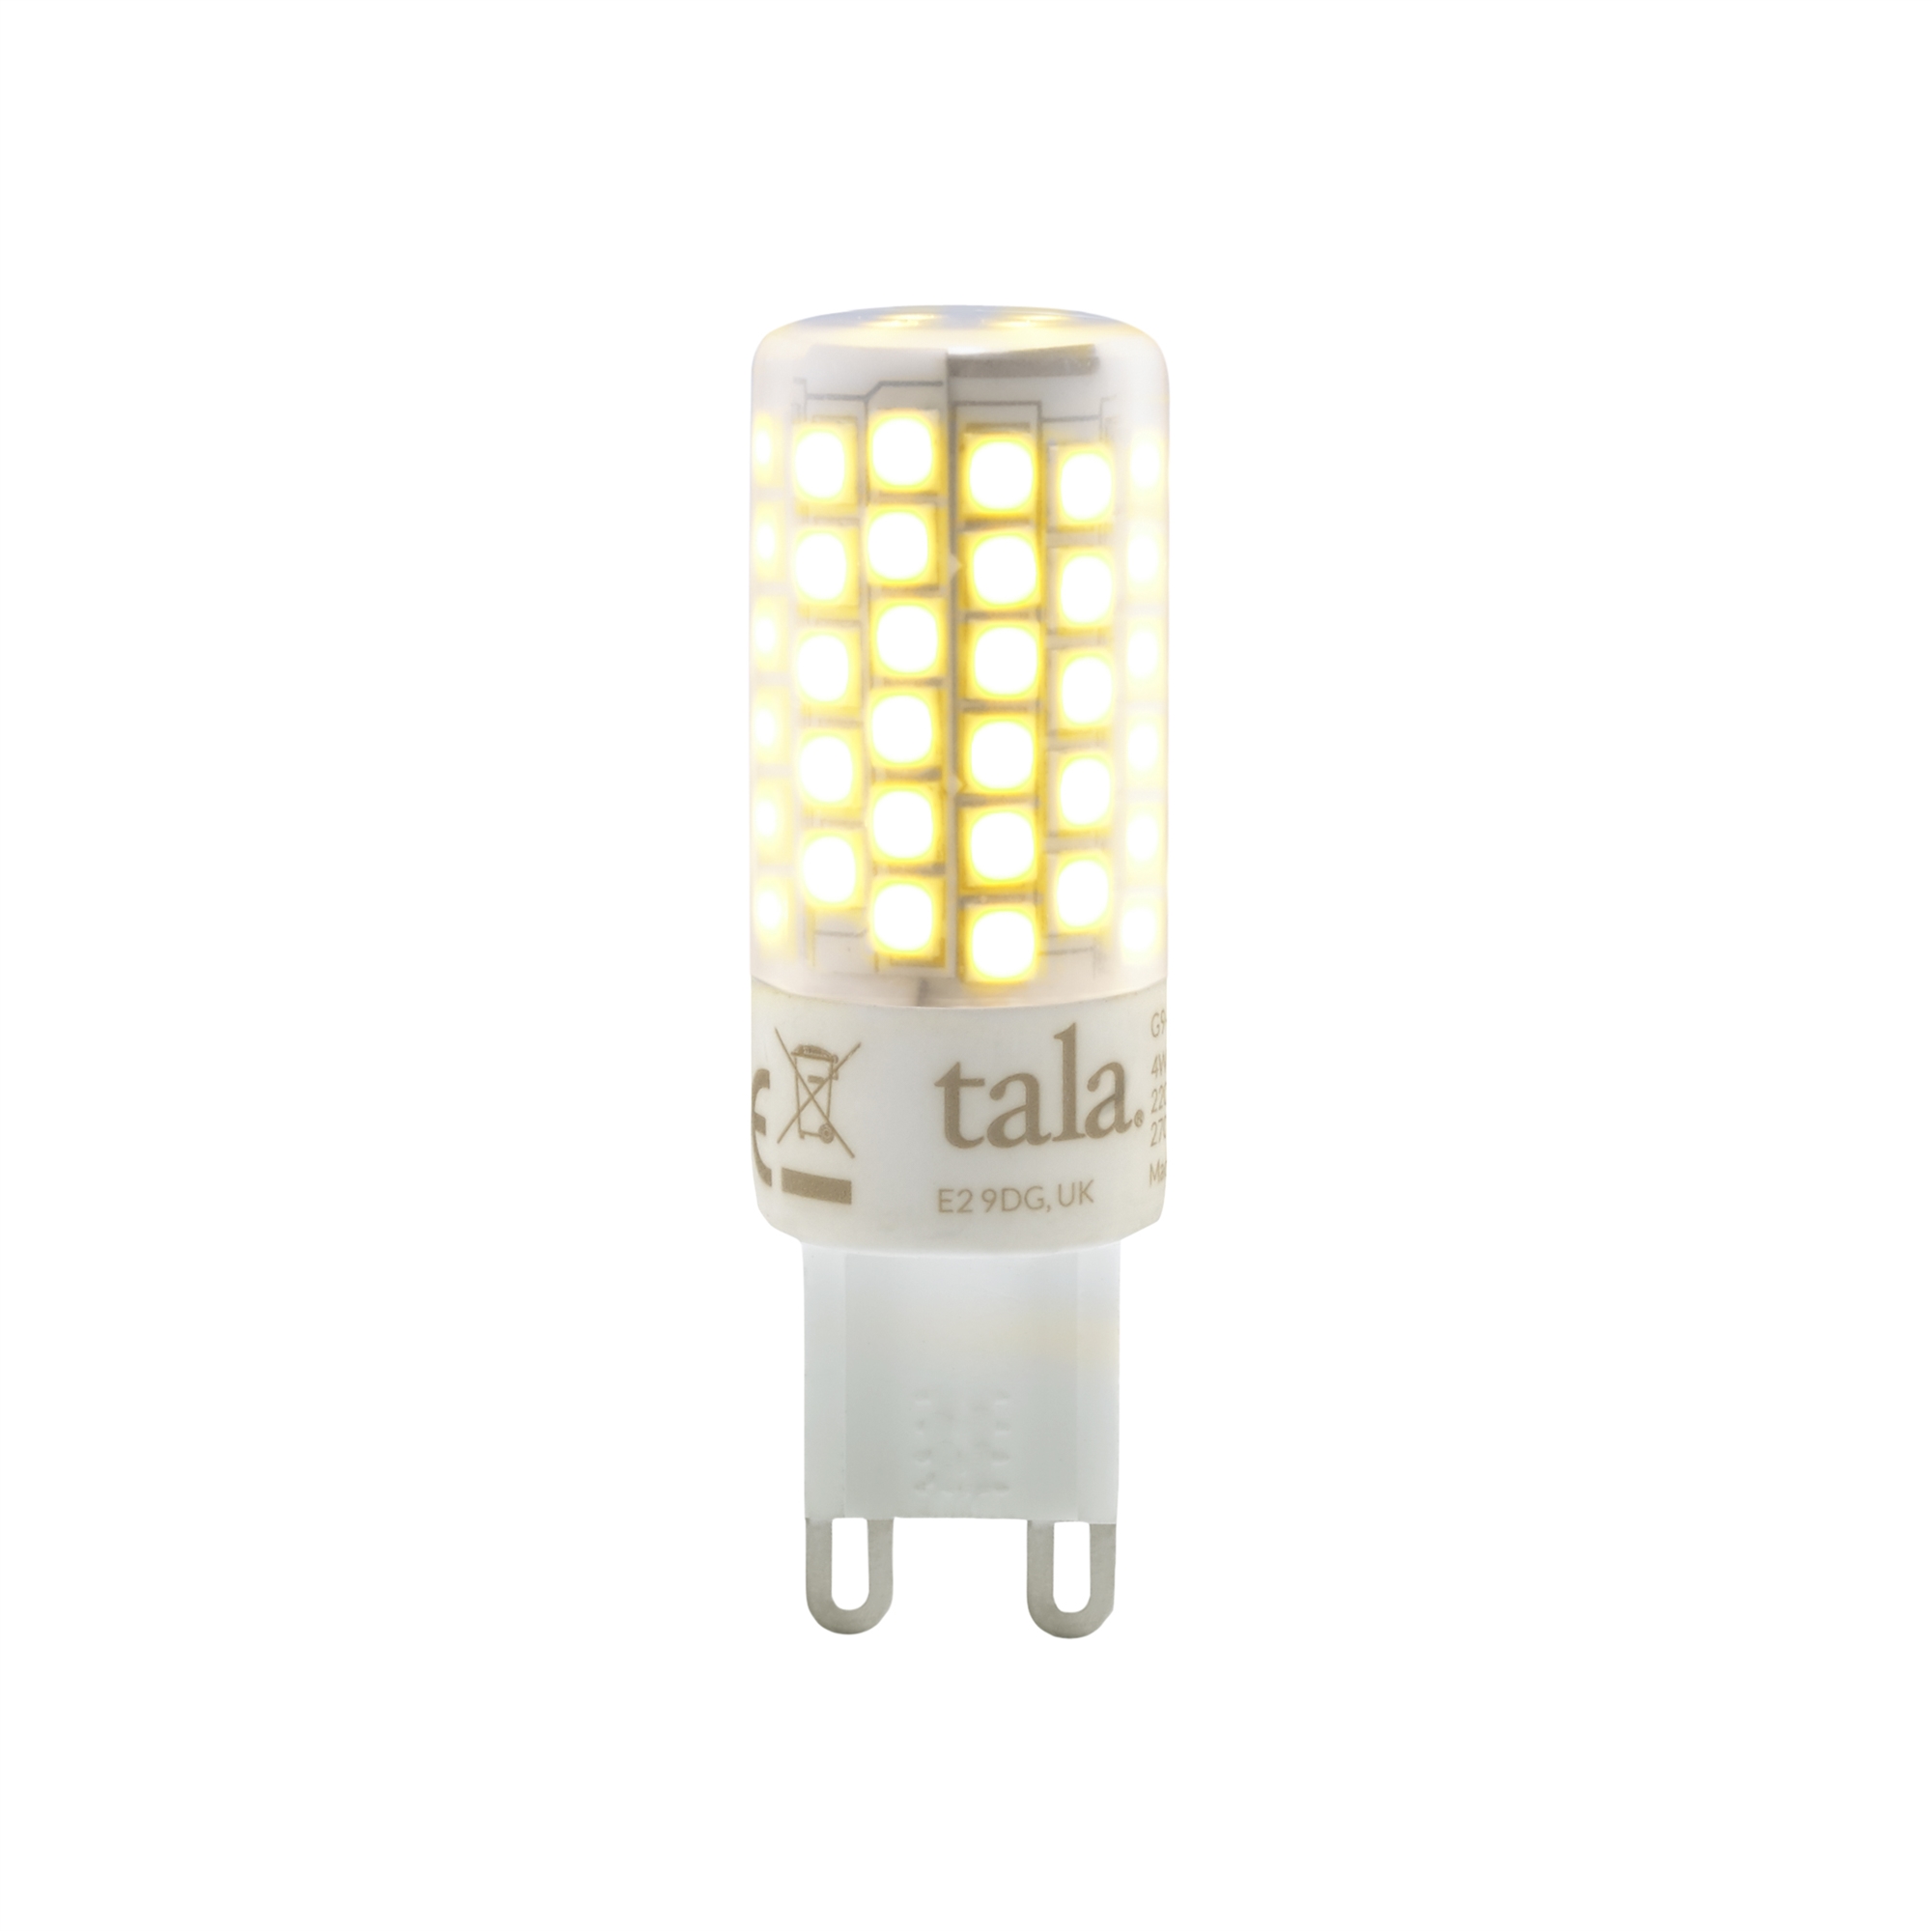 Tala G9 3.6W LED Lamp 2700K CRI 97 230V Dimmable Cover CE